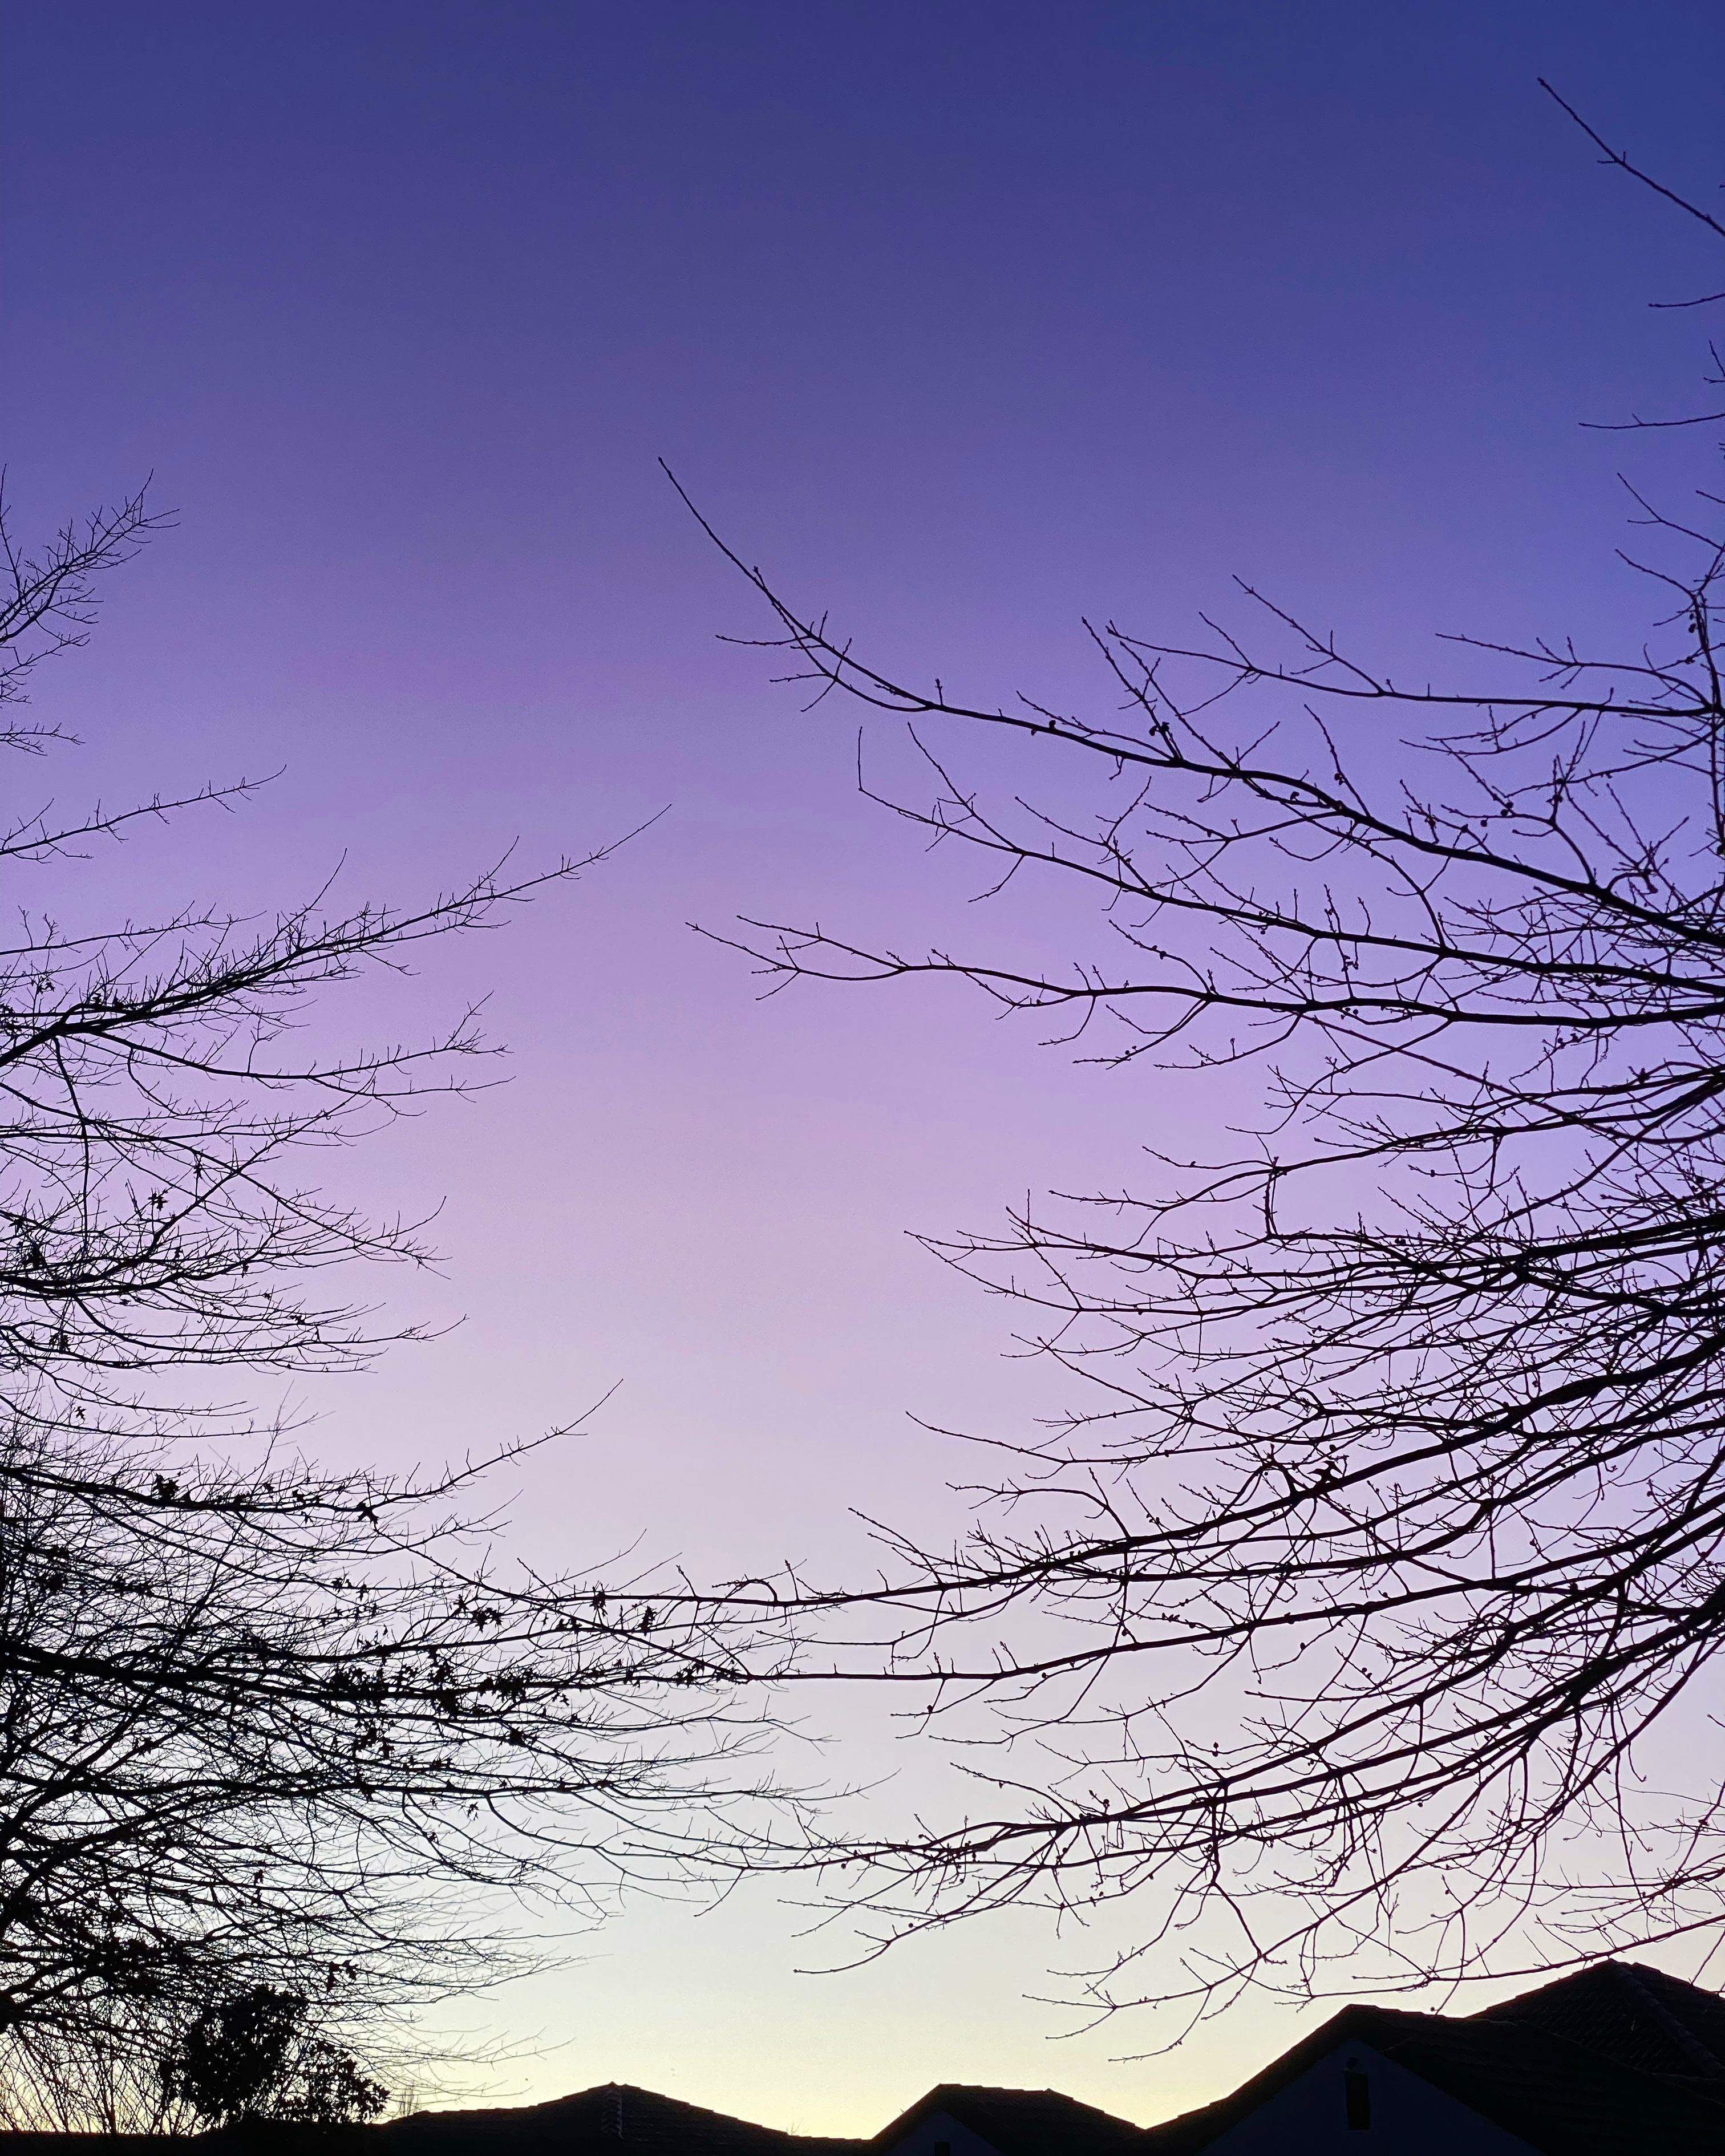 Bare tree branches frame the purple sky that fades to a whiteish-pale yellow at the horizon